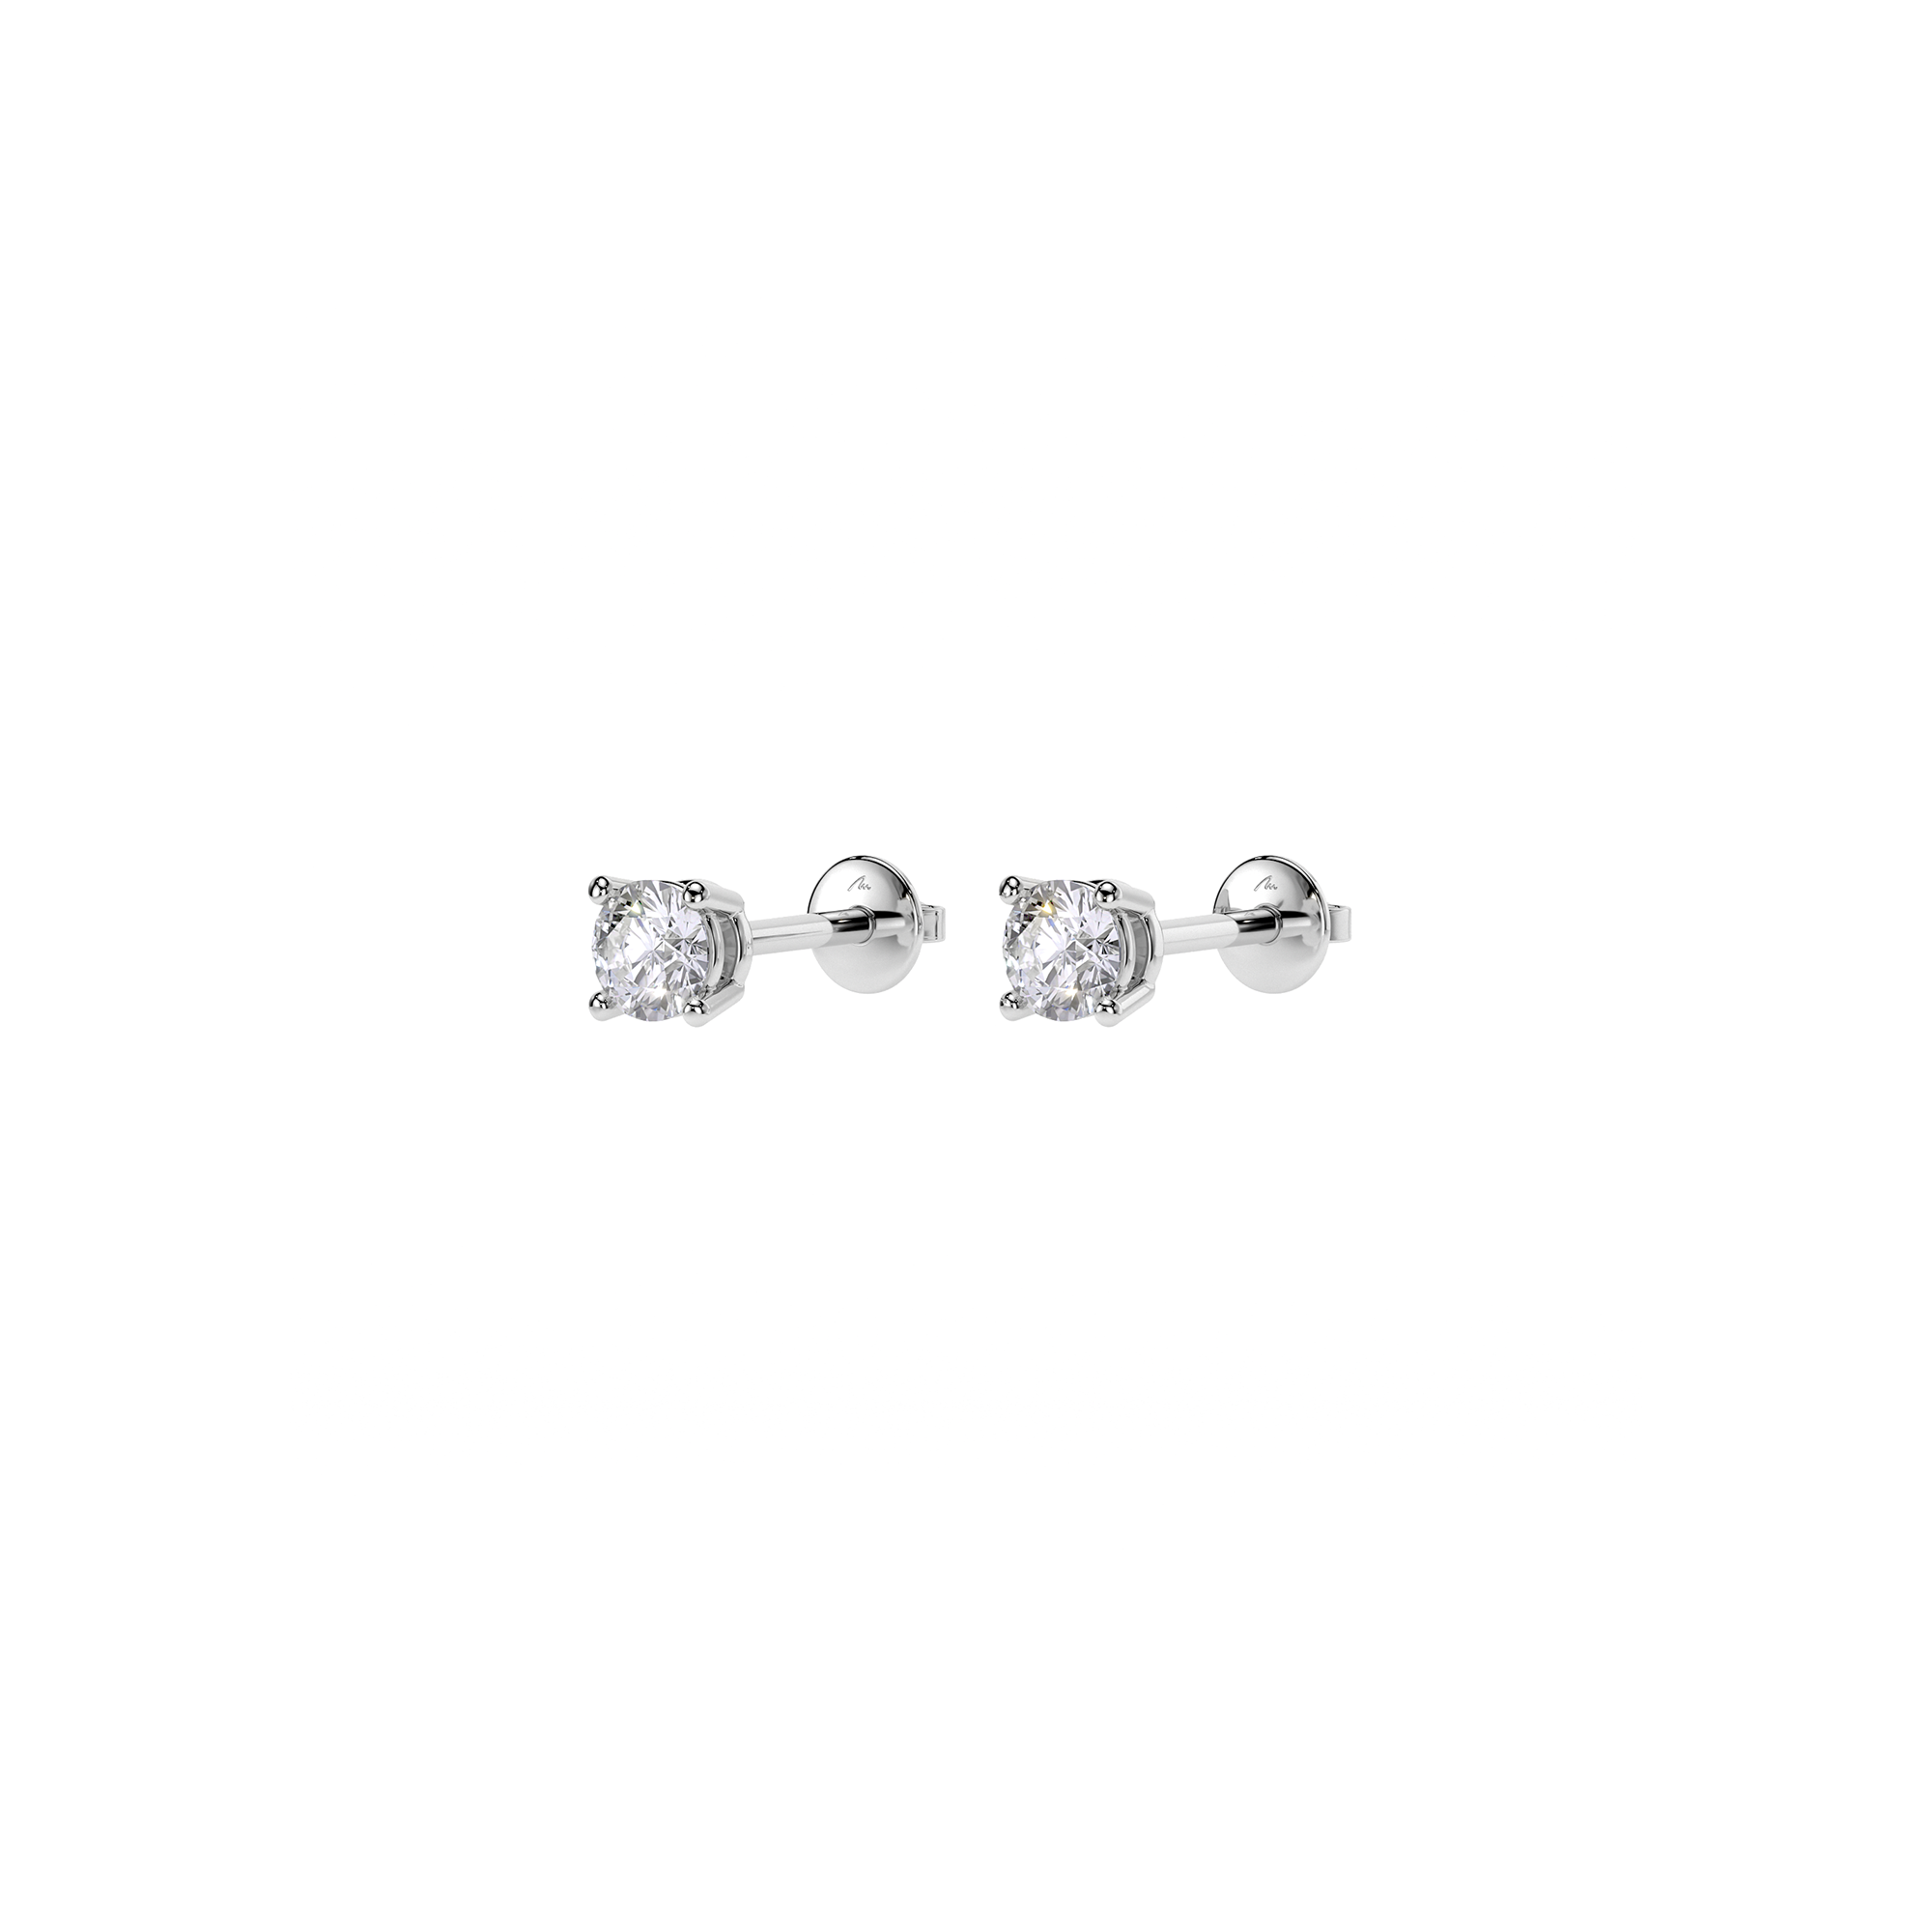 14 k white gold Studs earrings with 0.62 CT Lab Diamonds